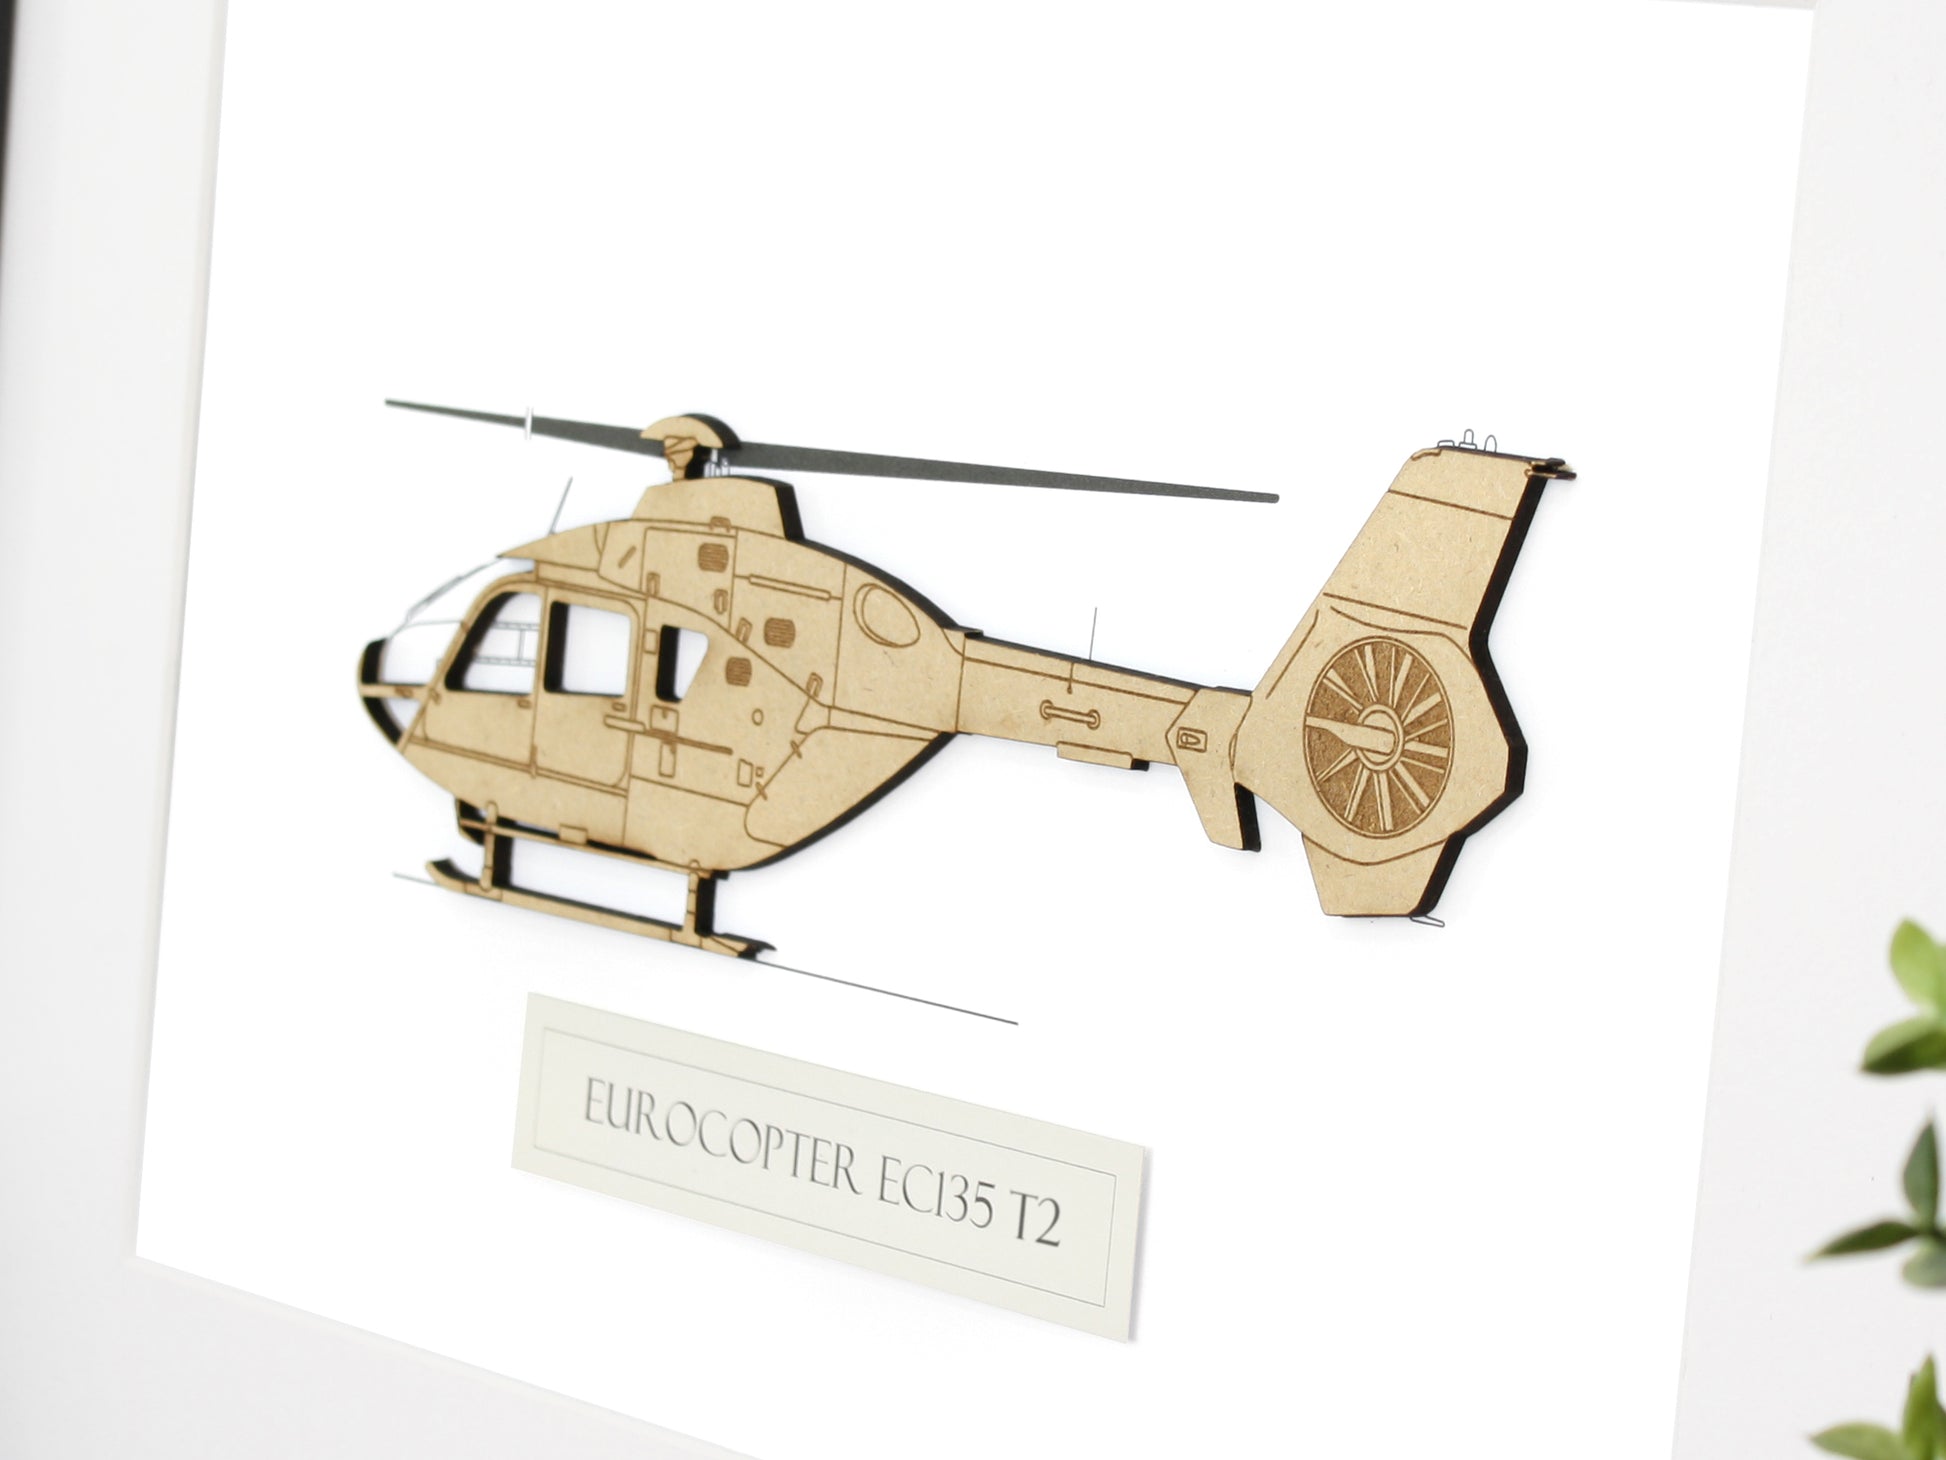 Eurocopter EC135 T2 helicopter gifts